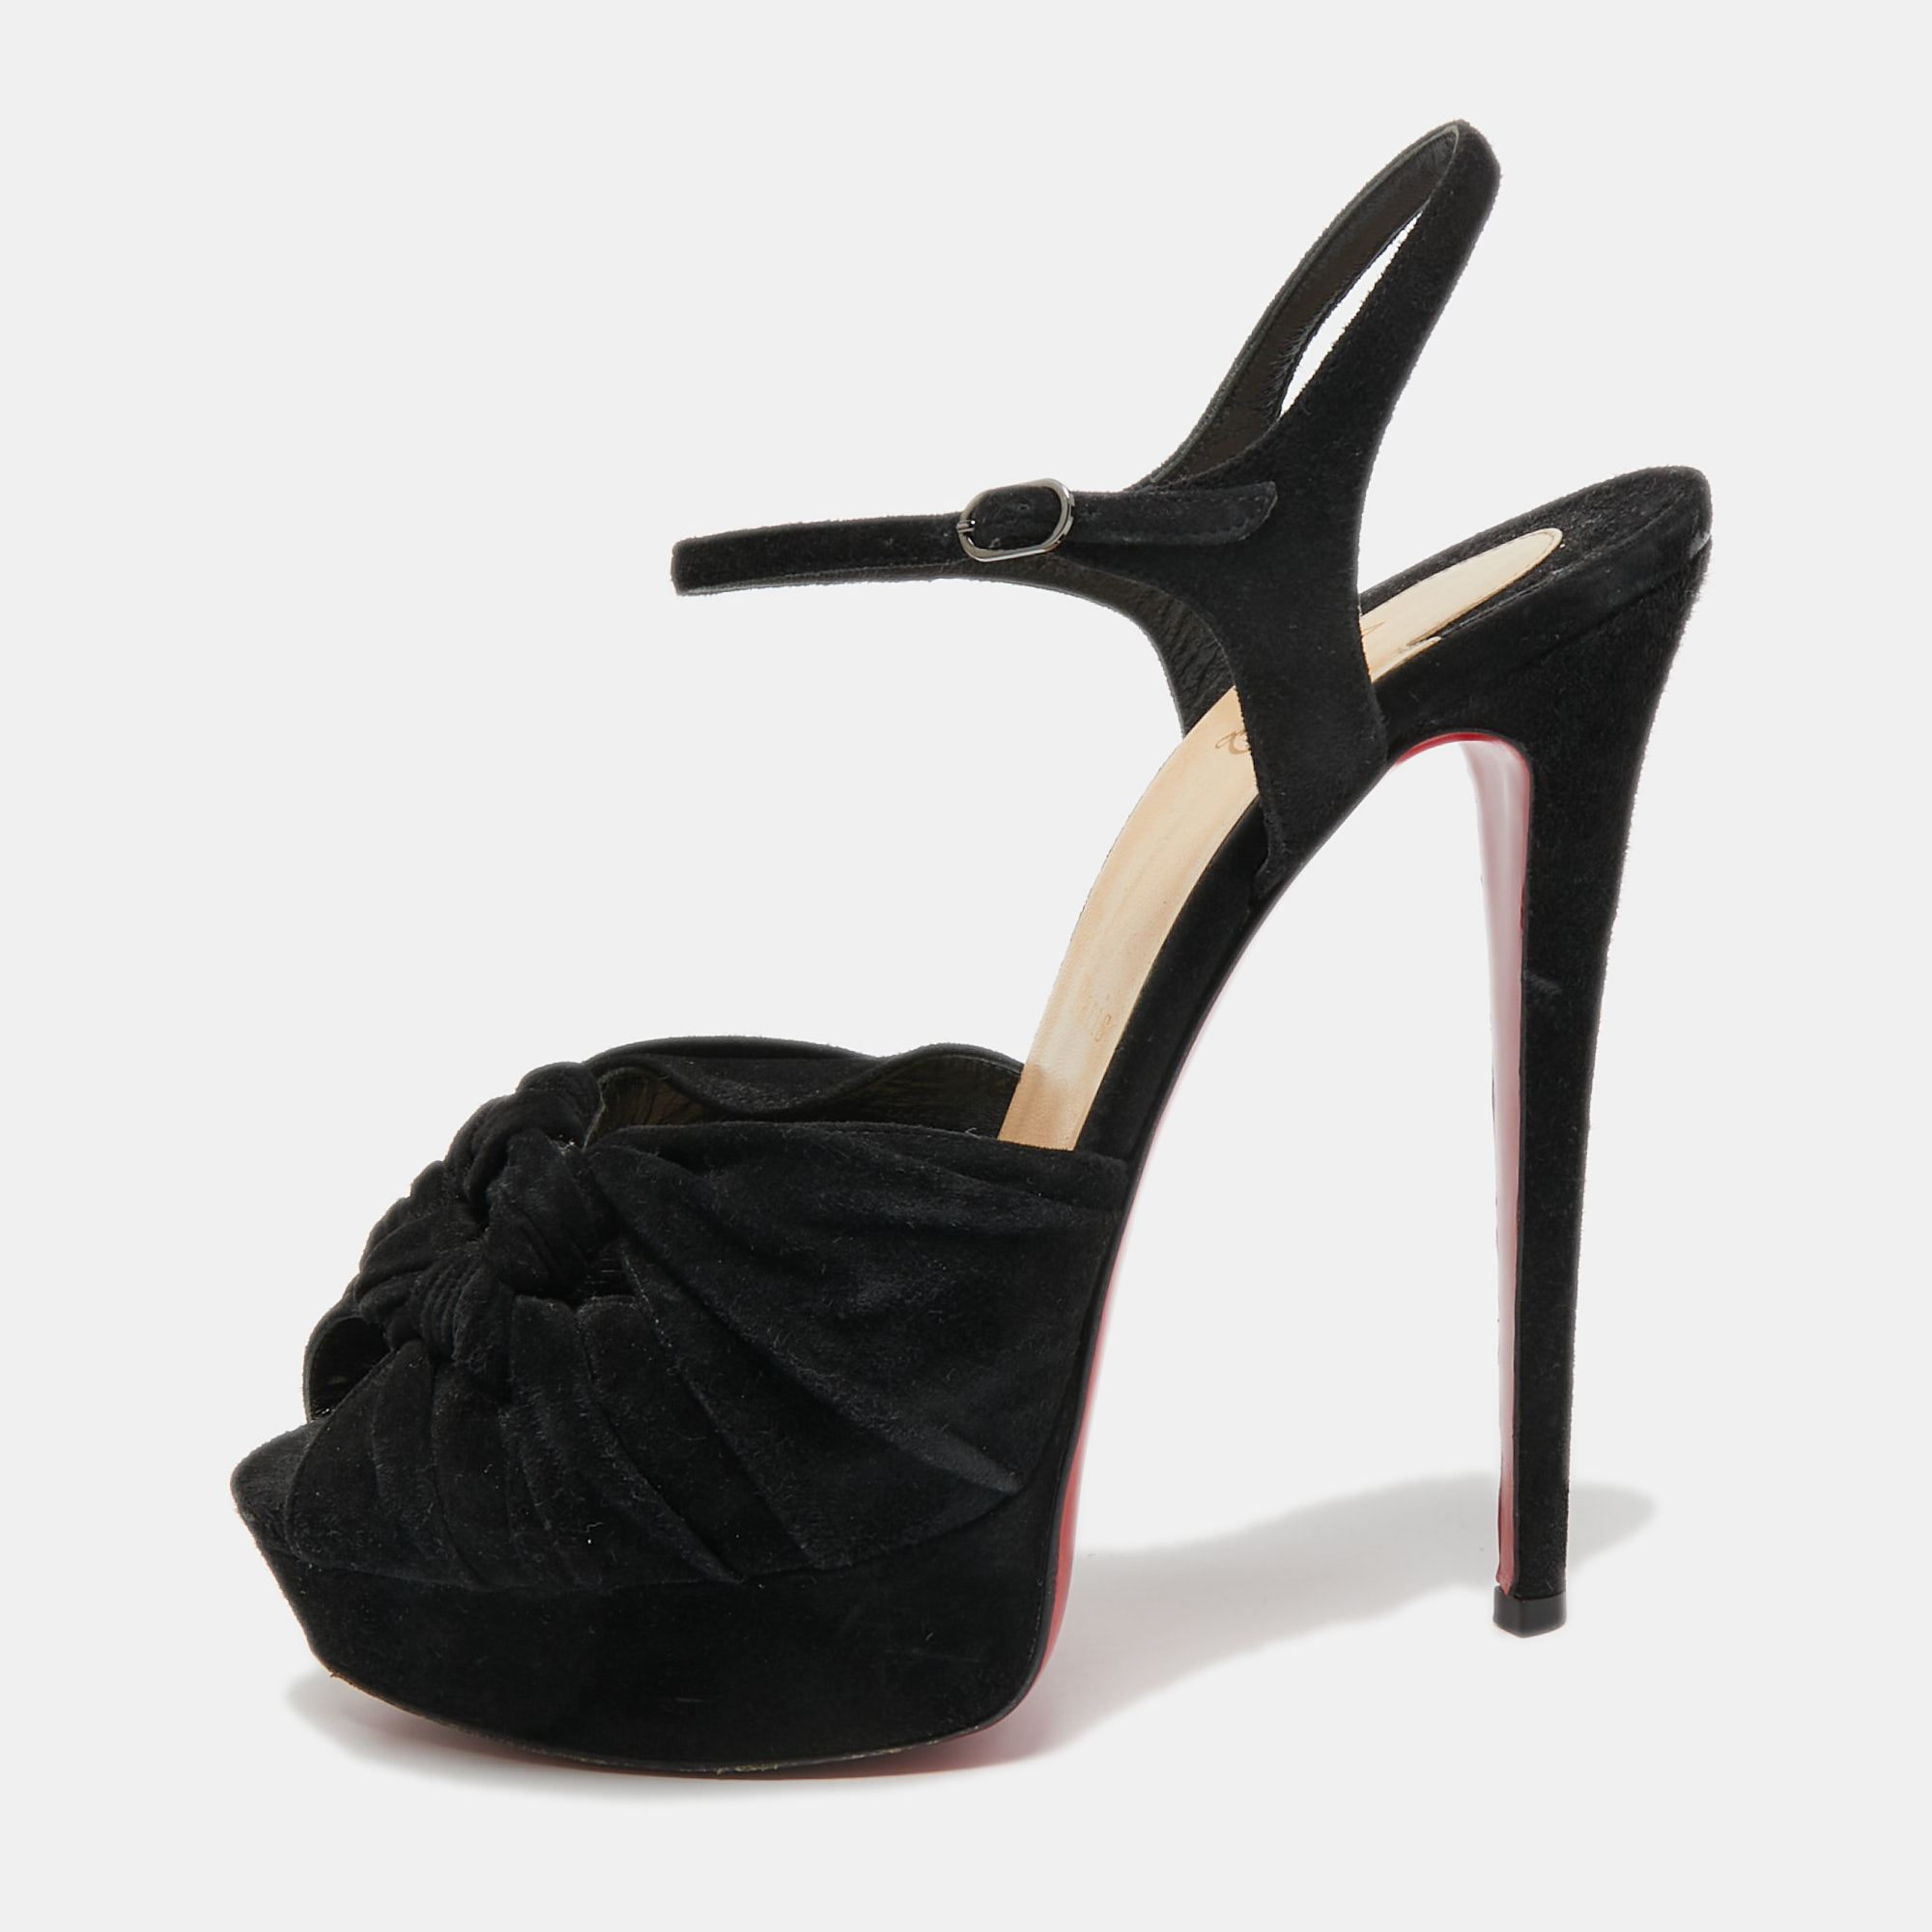 Christian Louboutin Black Knotted Suede Loescadiva Ankle Strap Sandals Size 39.5